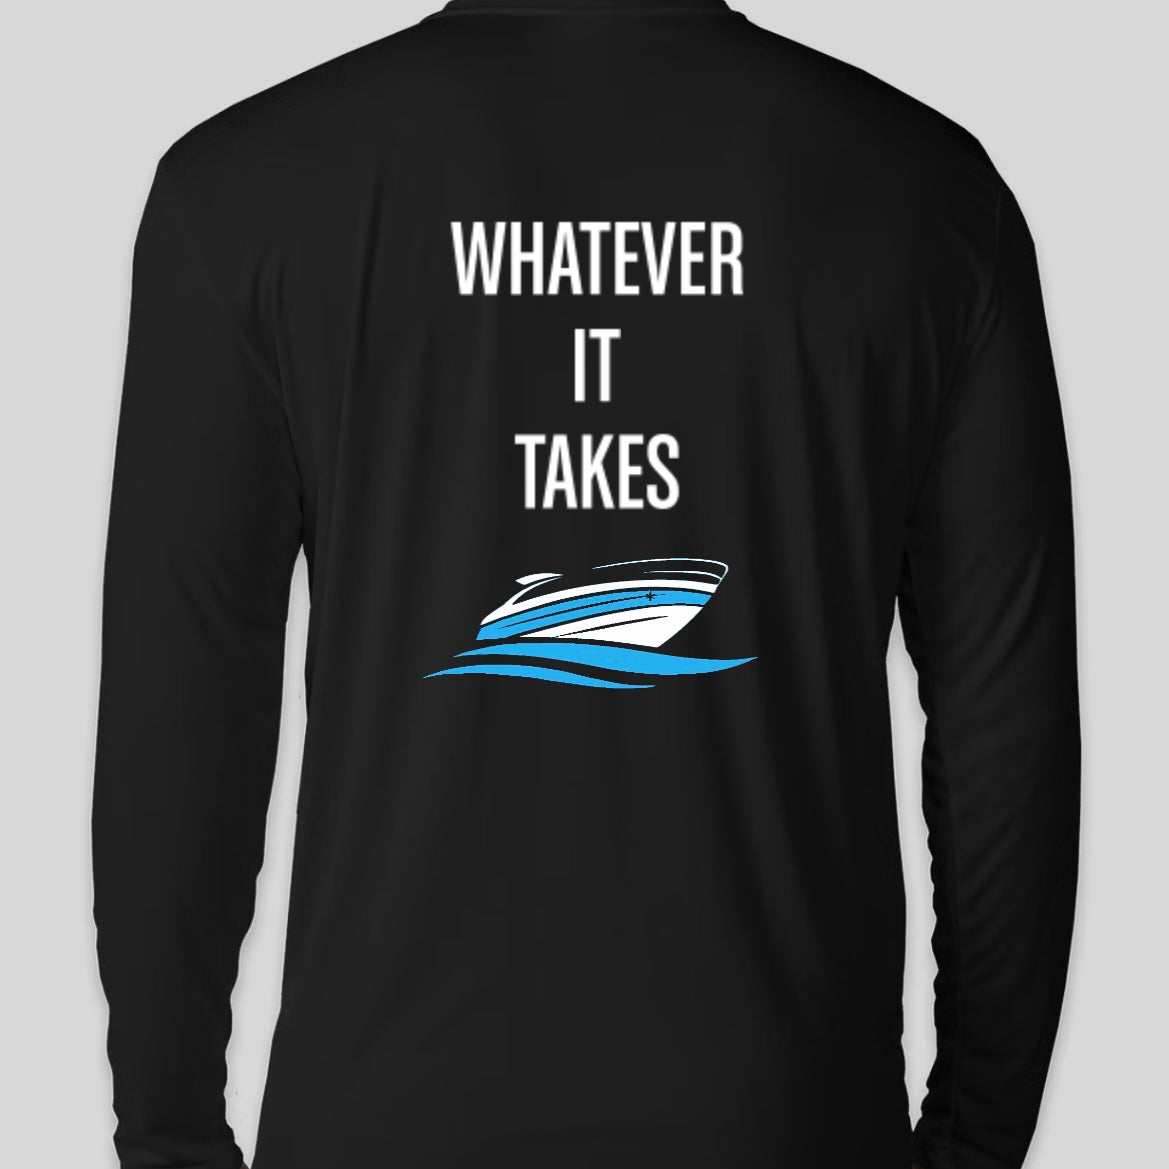 Whatever It Takes - 1% Long Sleeve